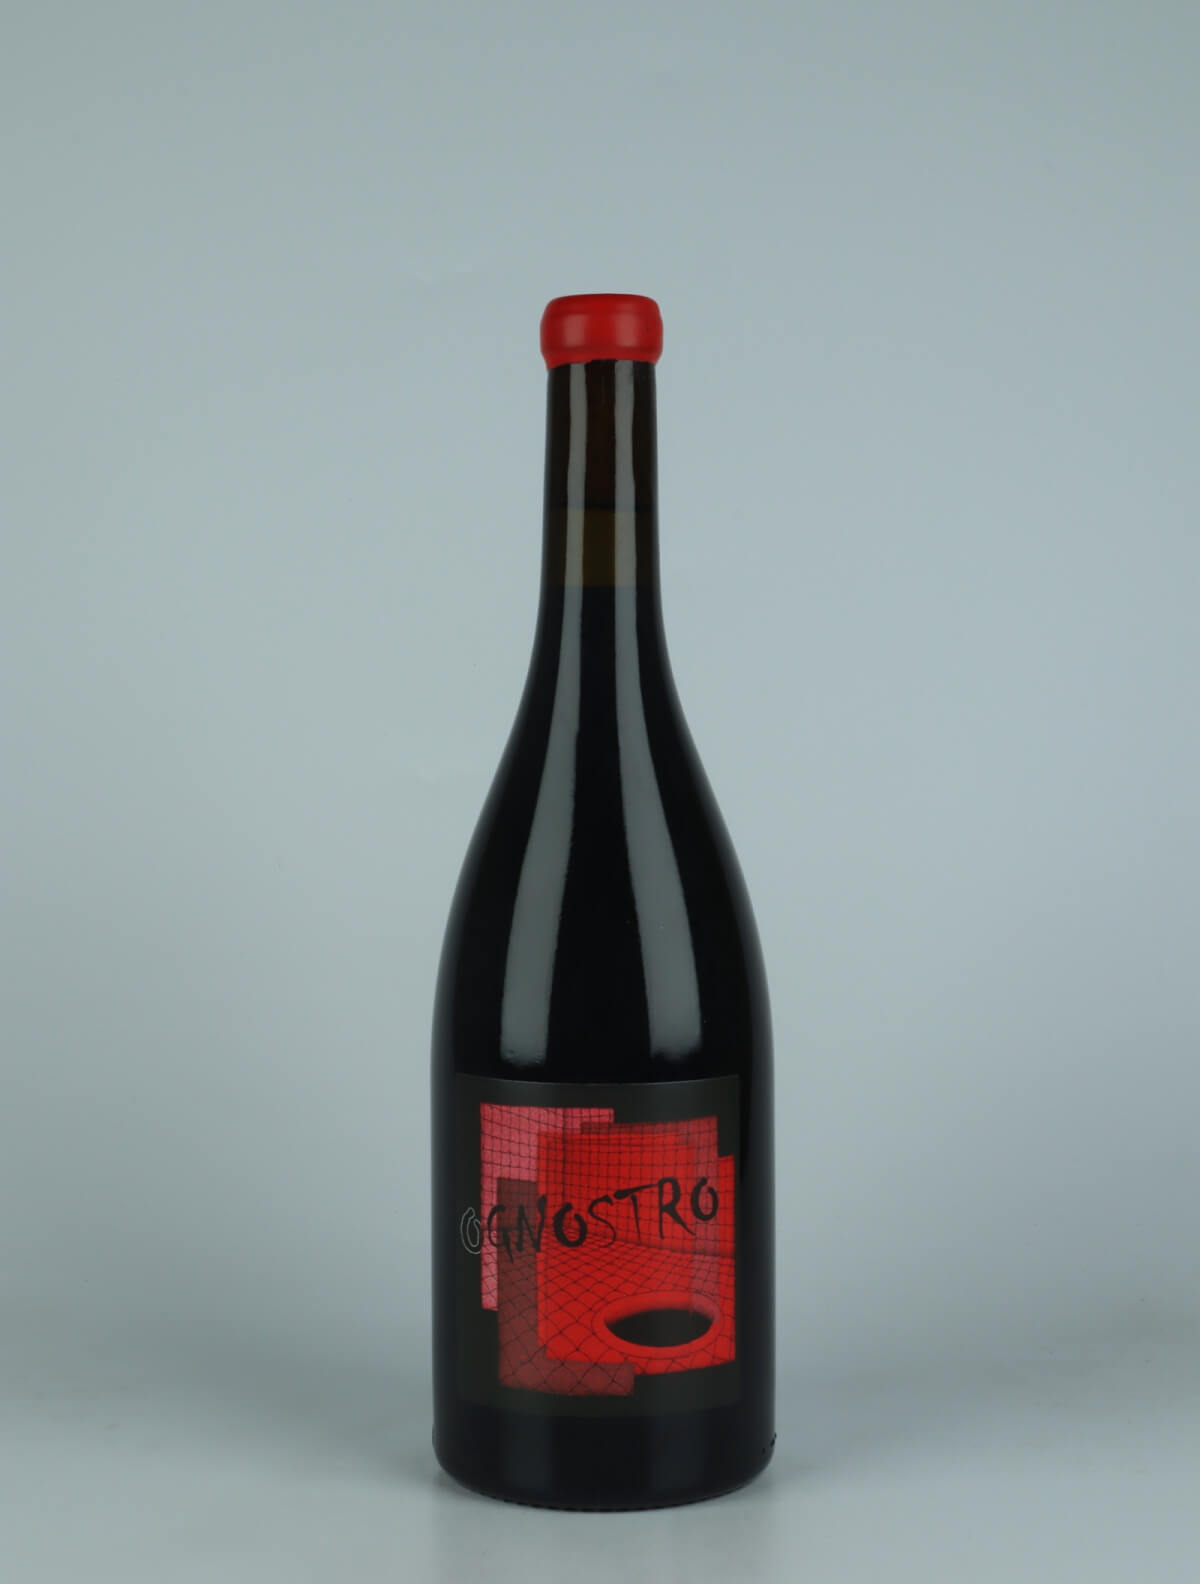 A bottle 2021 Ognostro Rosso Red wine from Marco Tinessa, Campania in Italy